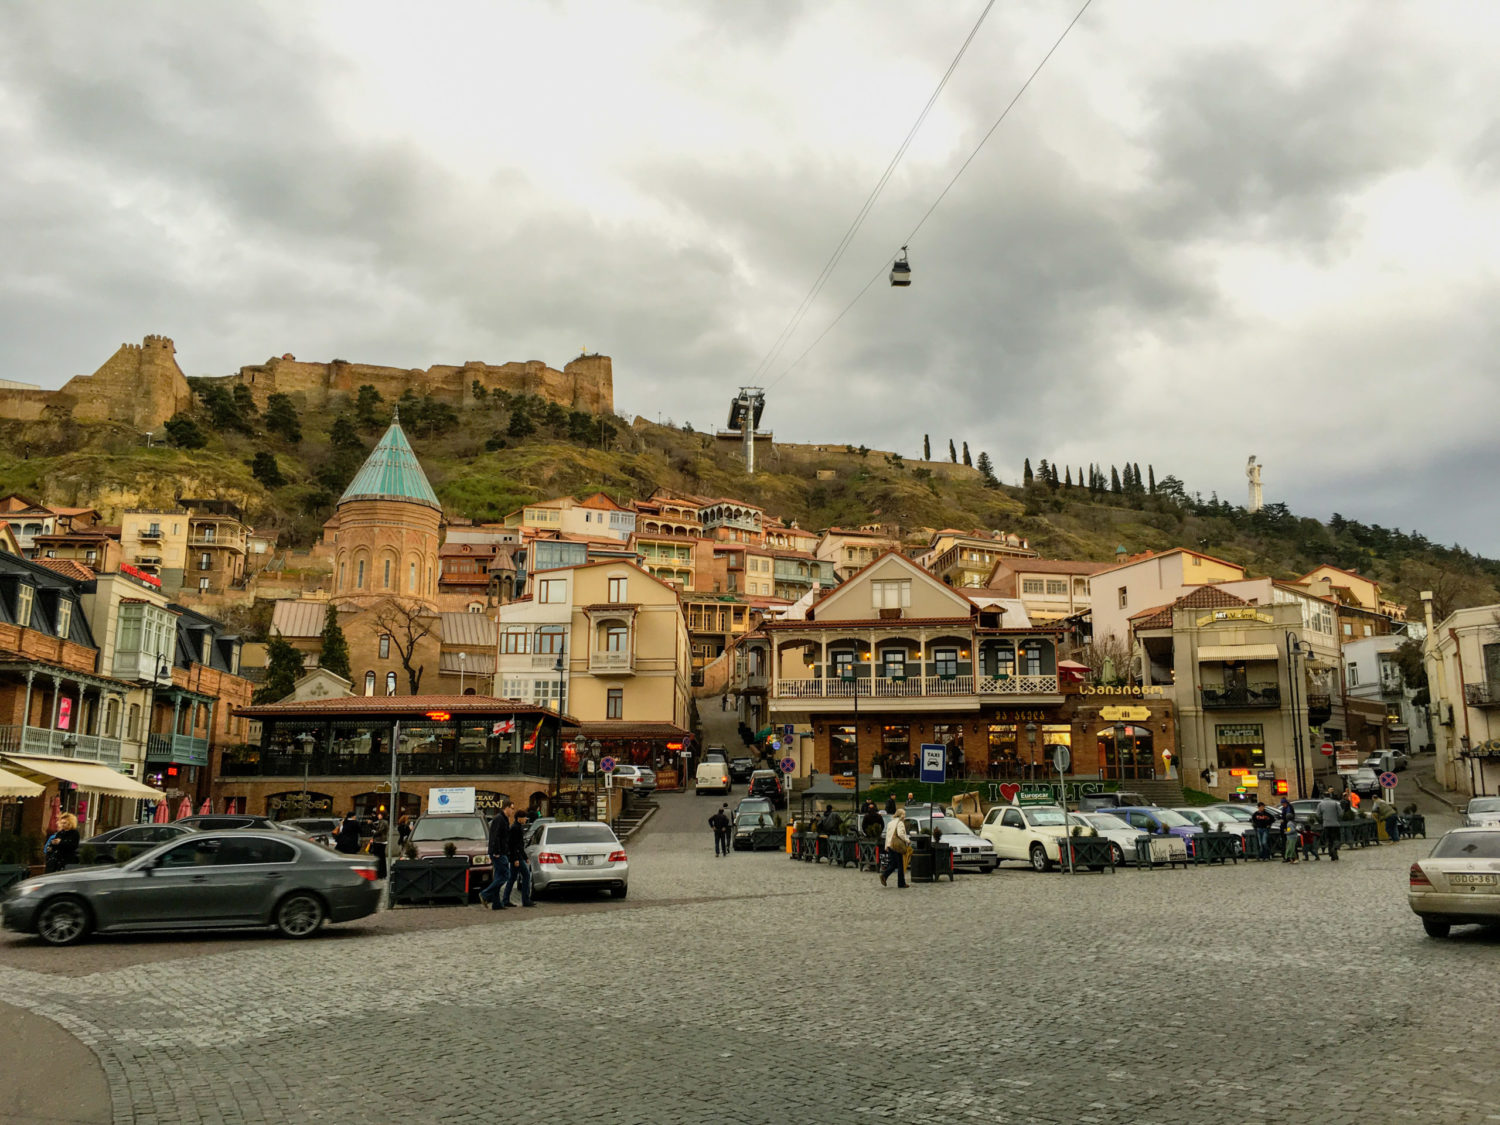 A Complete Guide to Visiting Narikala Fortress in Tbilisi